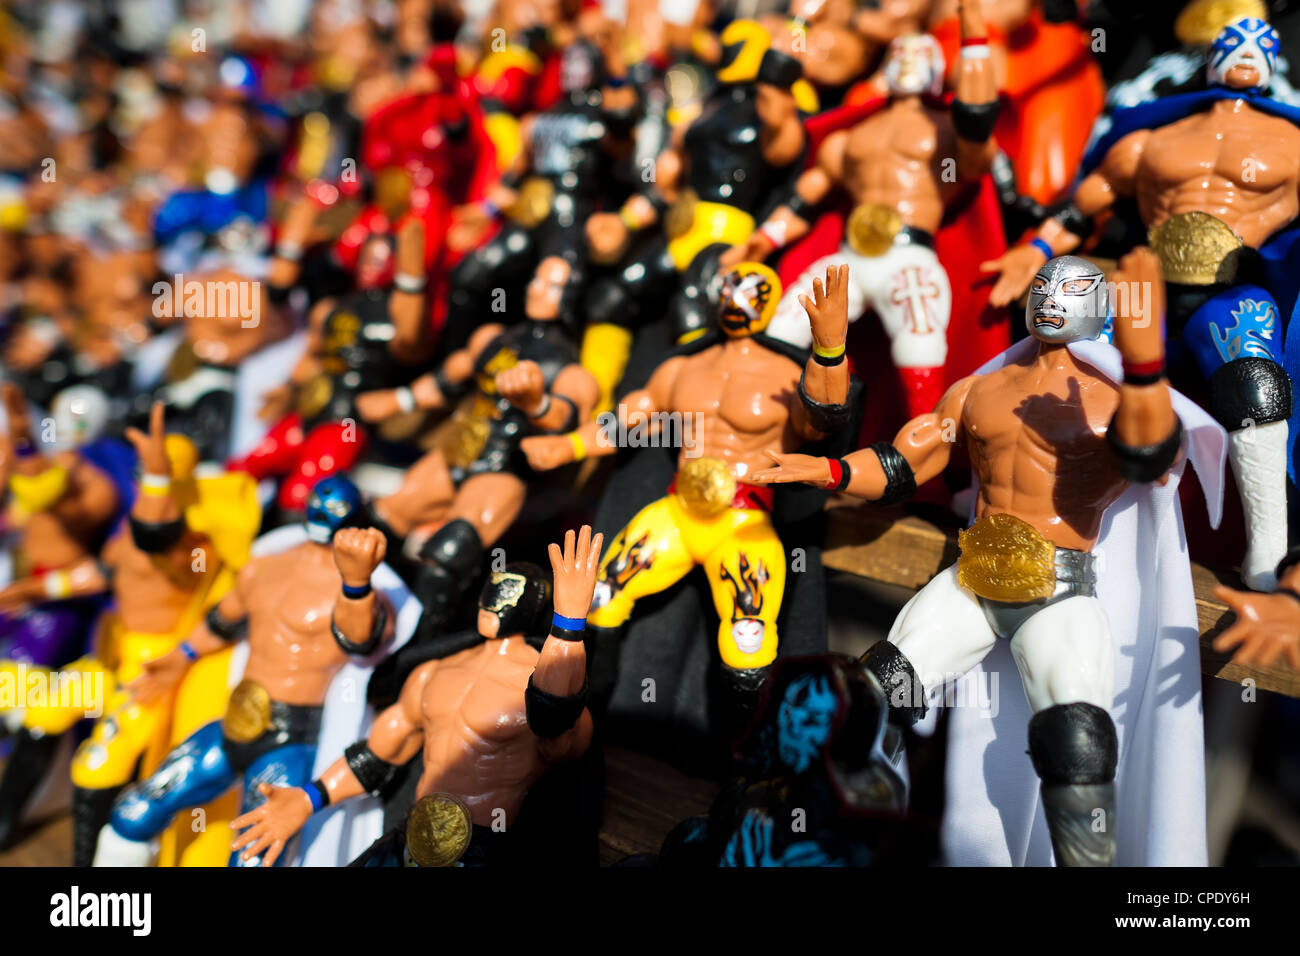 Colorful figures of the Lucha libre (Mexican wrestling) wrestlers for sale in a street shop in Mexico City, Mexico. Stock Photo